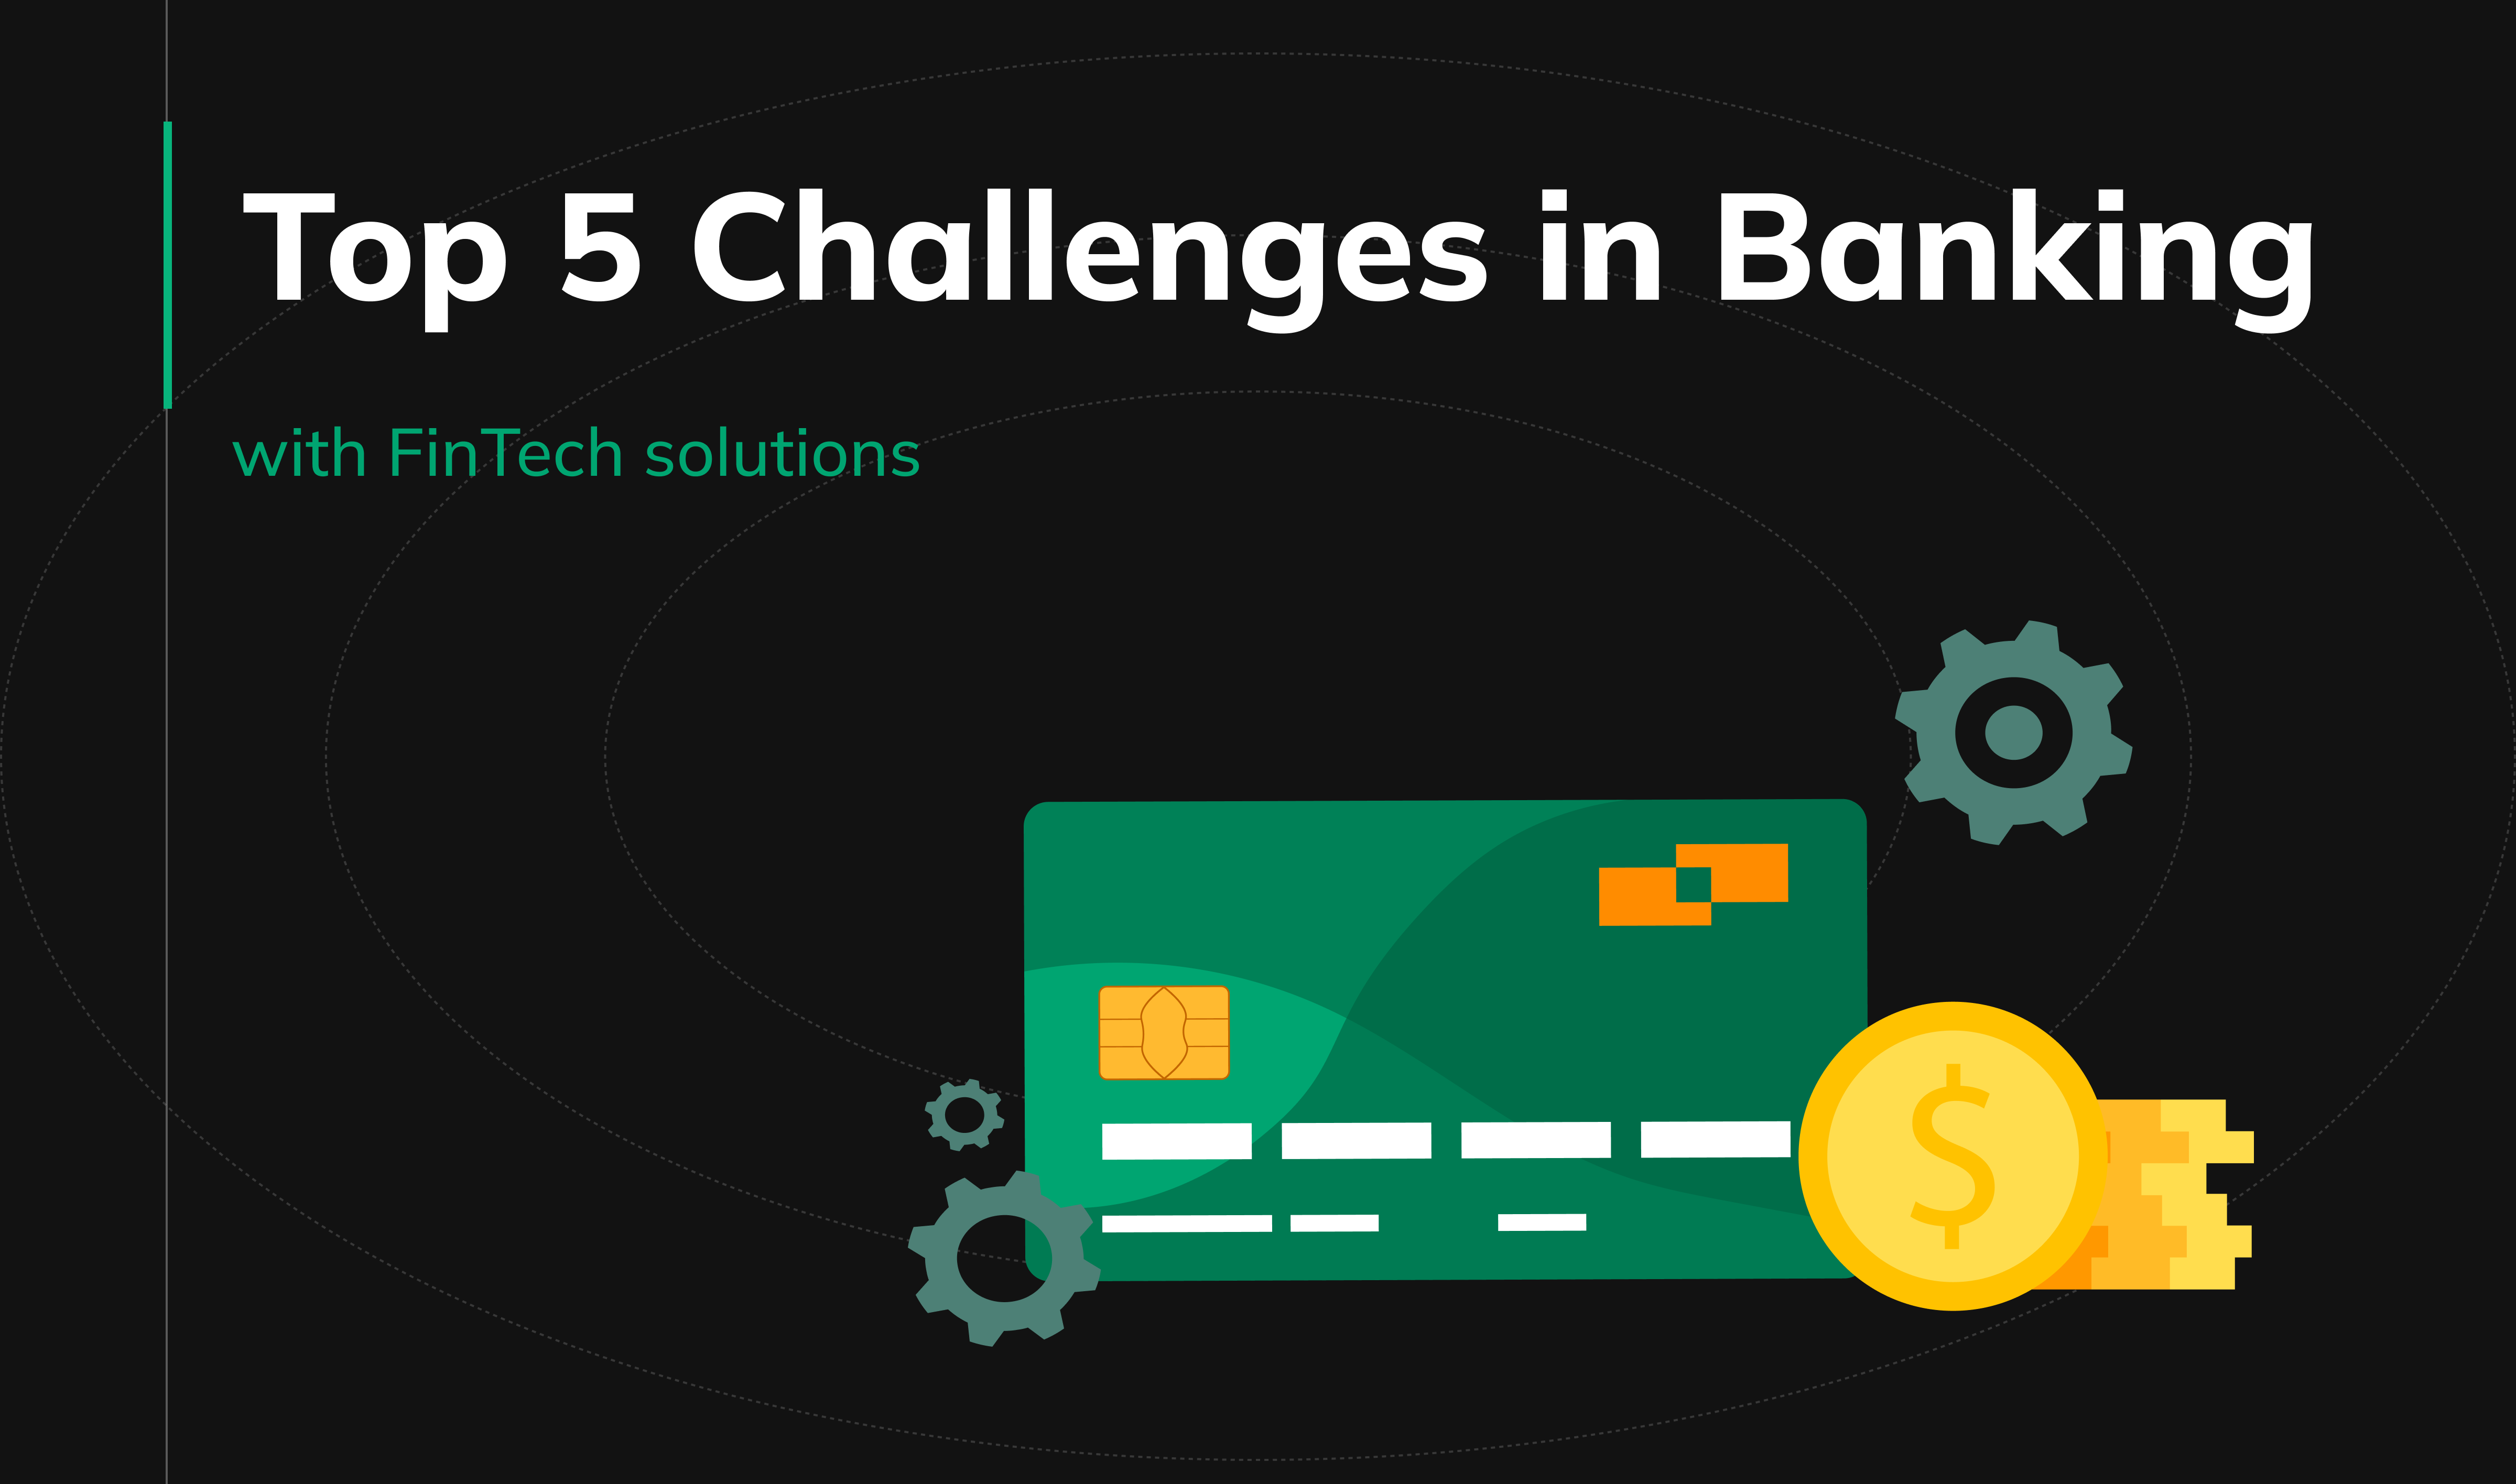 Top 5 Challenges in Banking with FinTech solutions